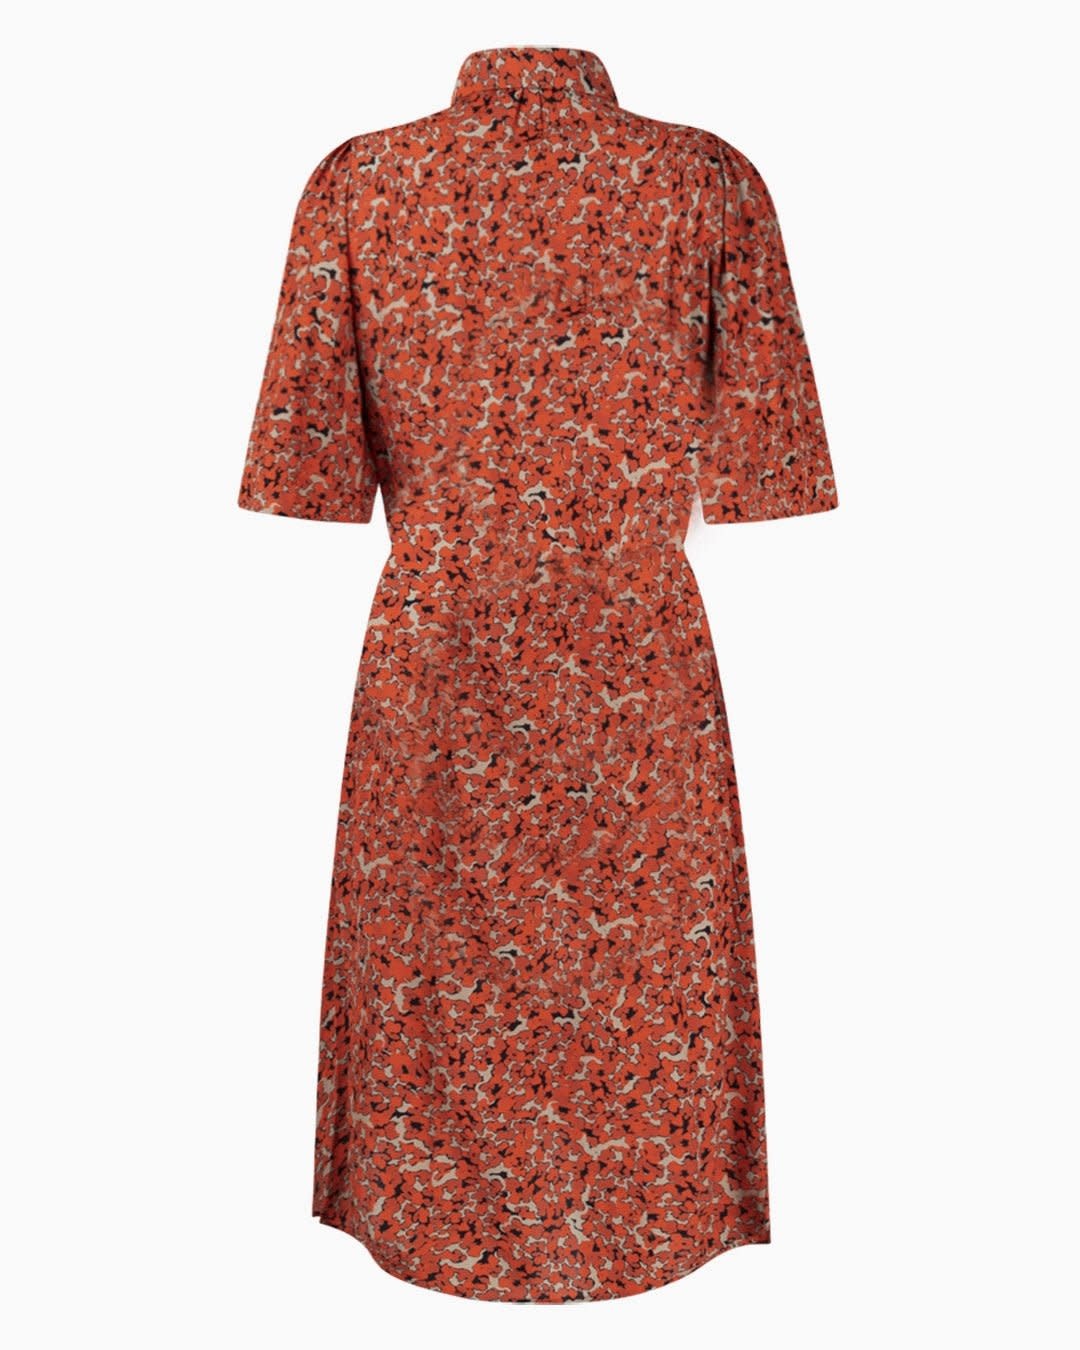 Another-Label Another-Label, Nasma dress s/s, dot red, XS